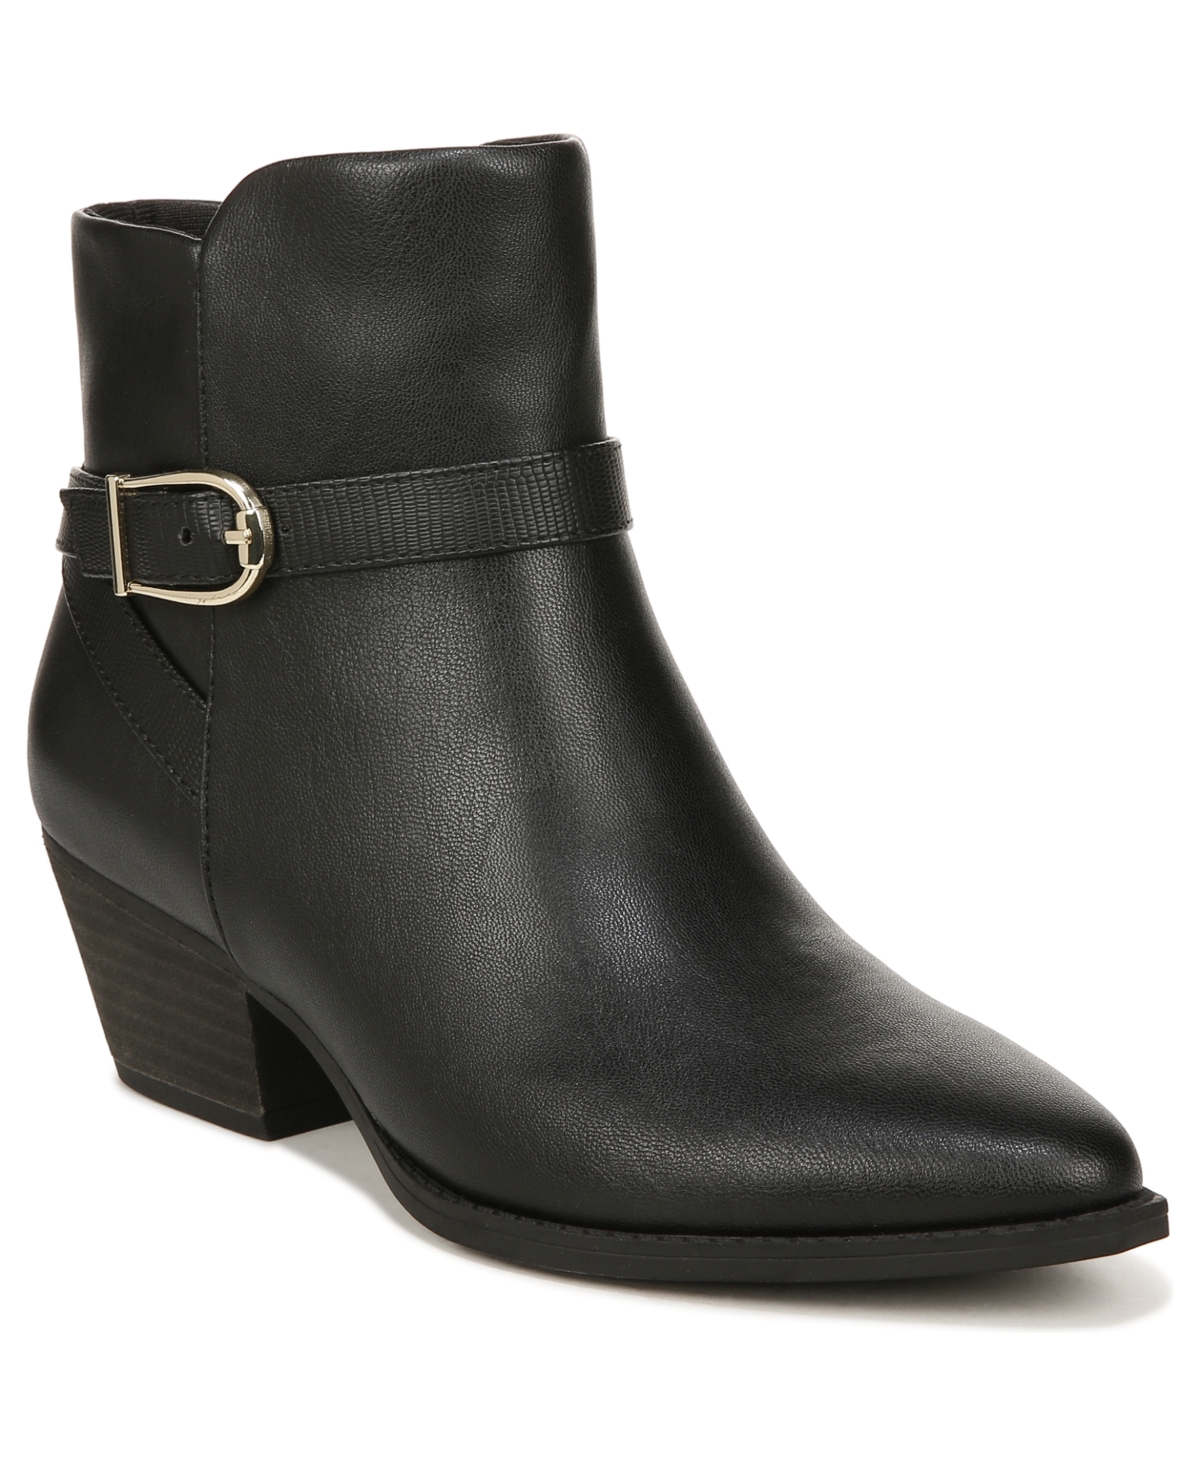 Roxanne Booties - Black Faux Leather